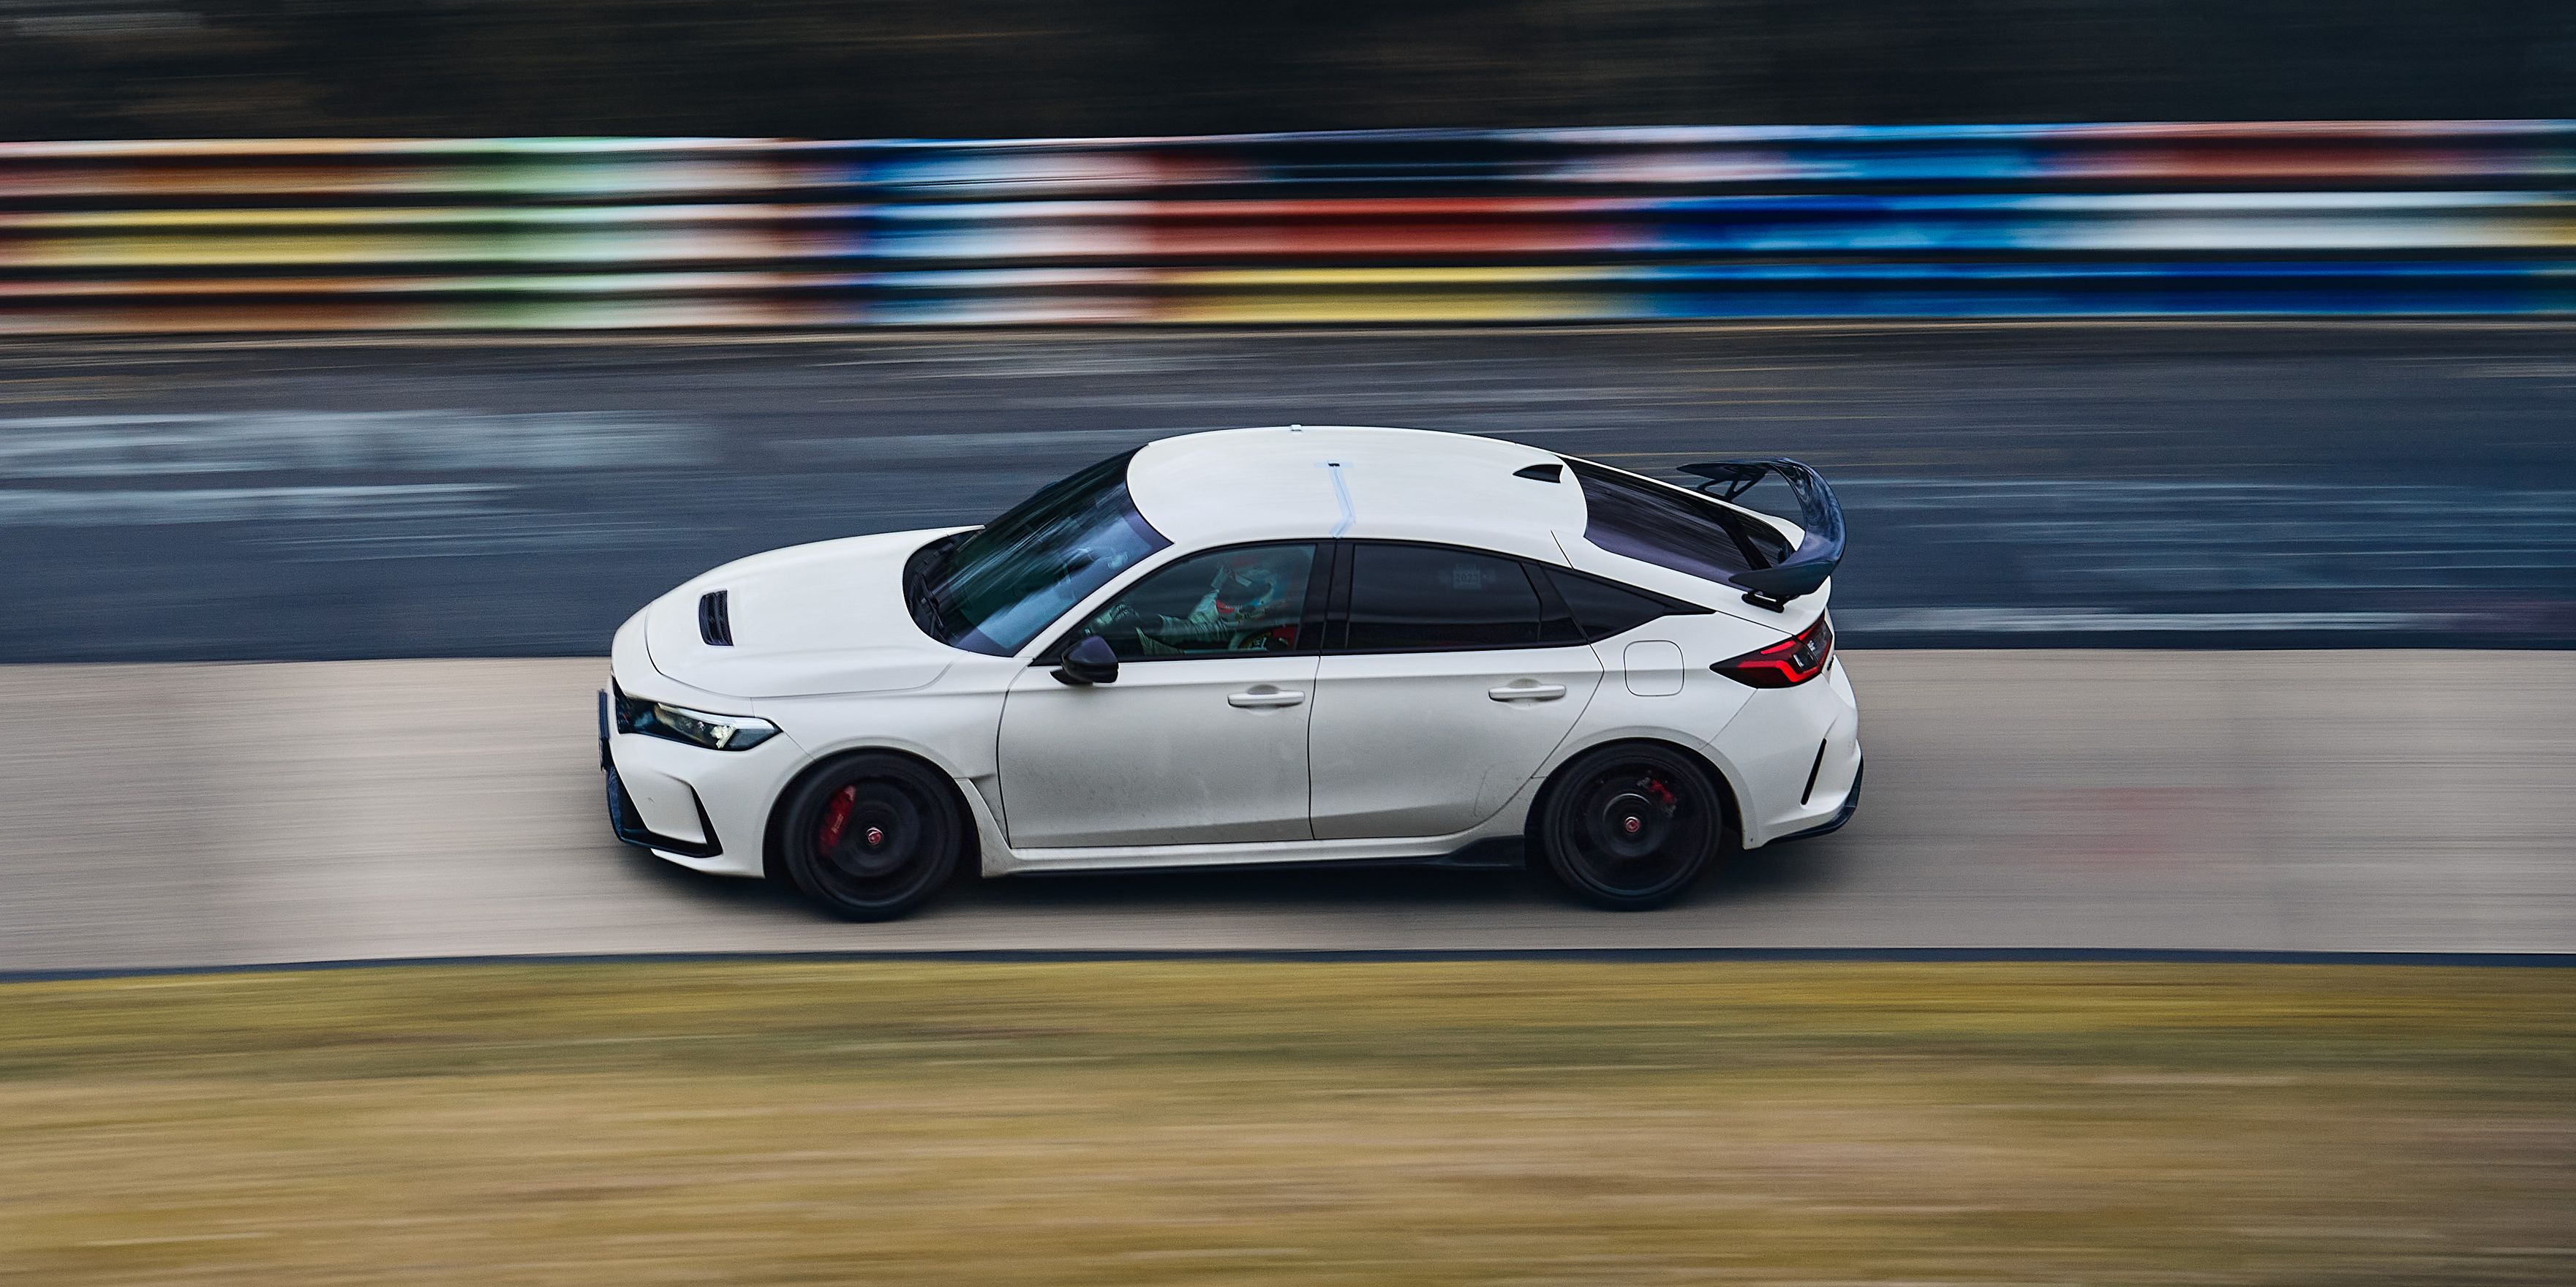 The Honda Civic Type R Is Once Again the Front-Drive Nürburgring Champ